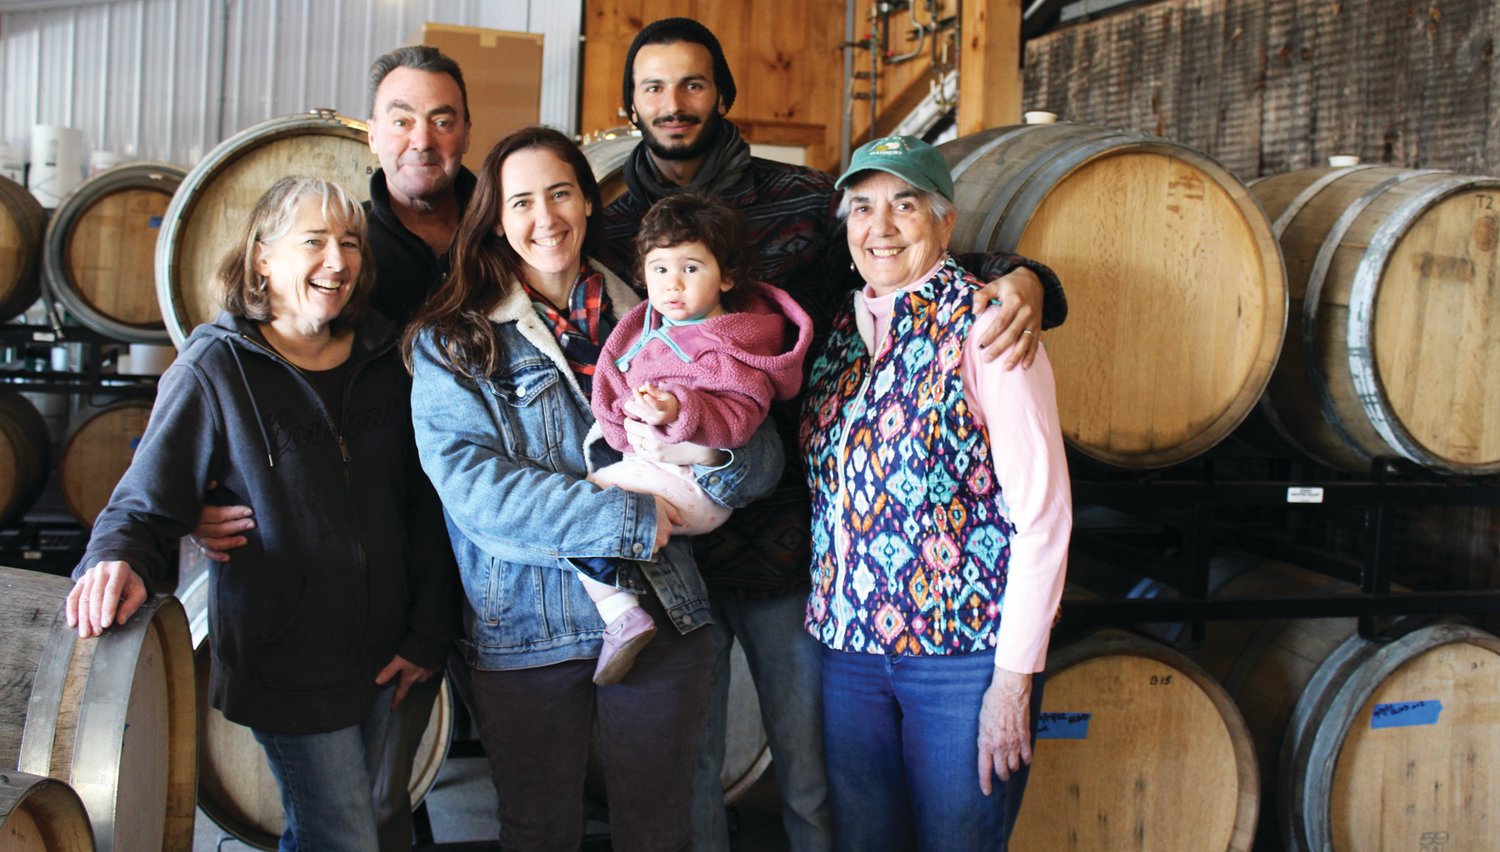 The Manoff family has been producing cider from fruit grown on their farm in Solebury Township since 2018.